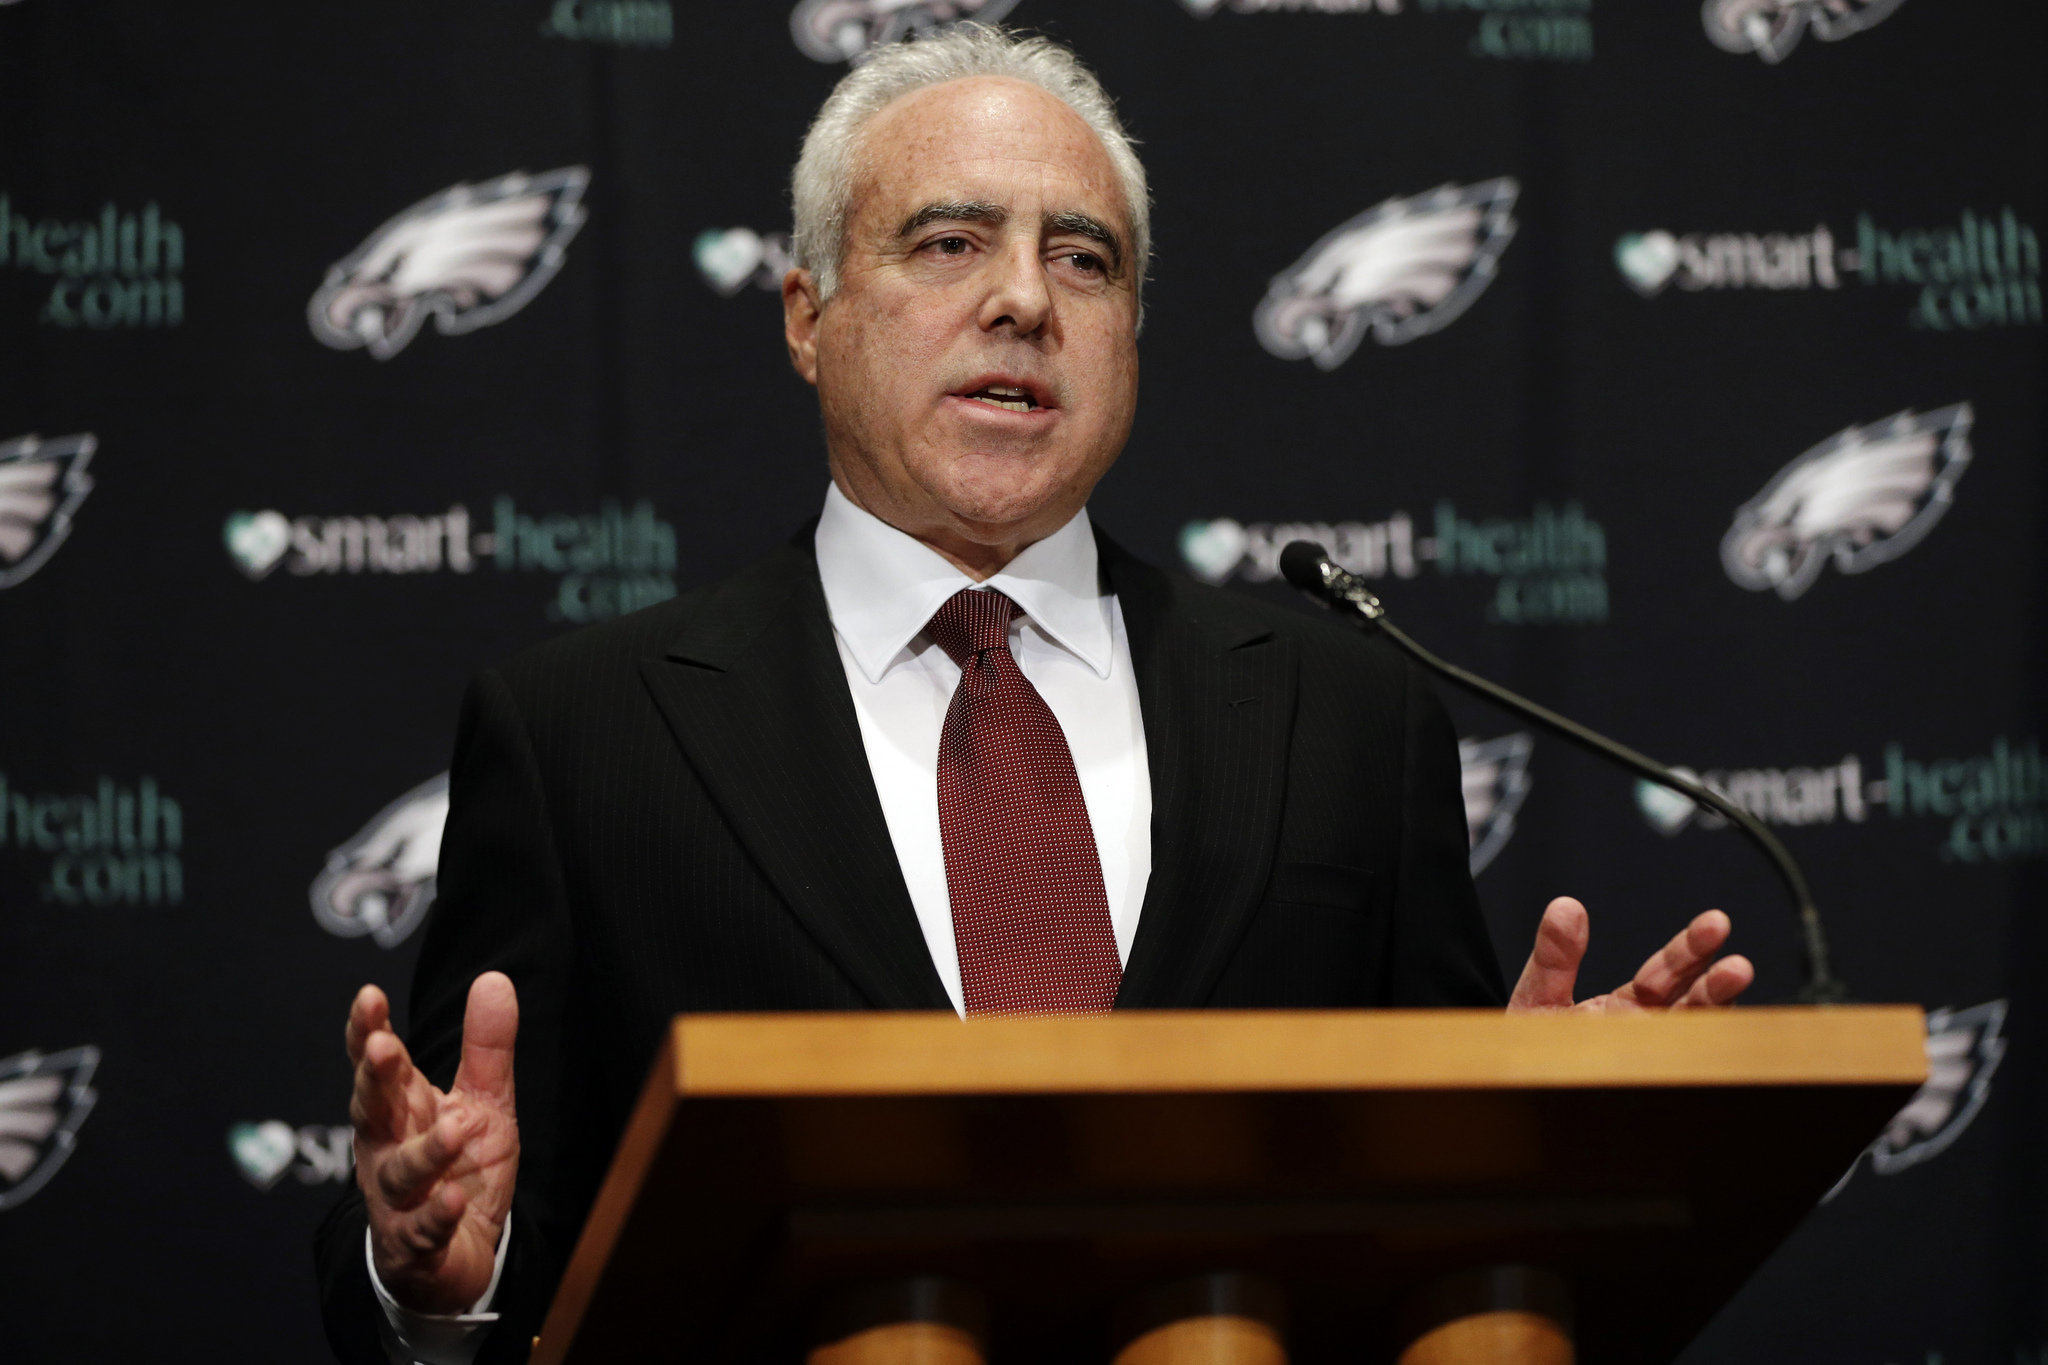 Eagles Owner Jeffrey Lurie Releases Statement About The Status Of His Organization